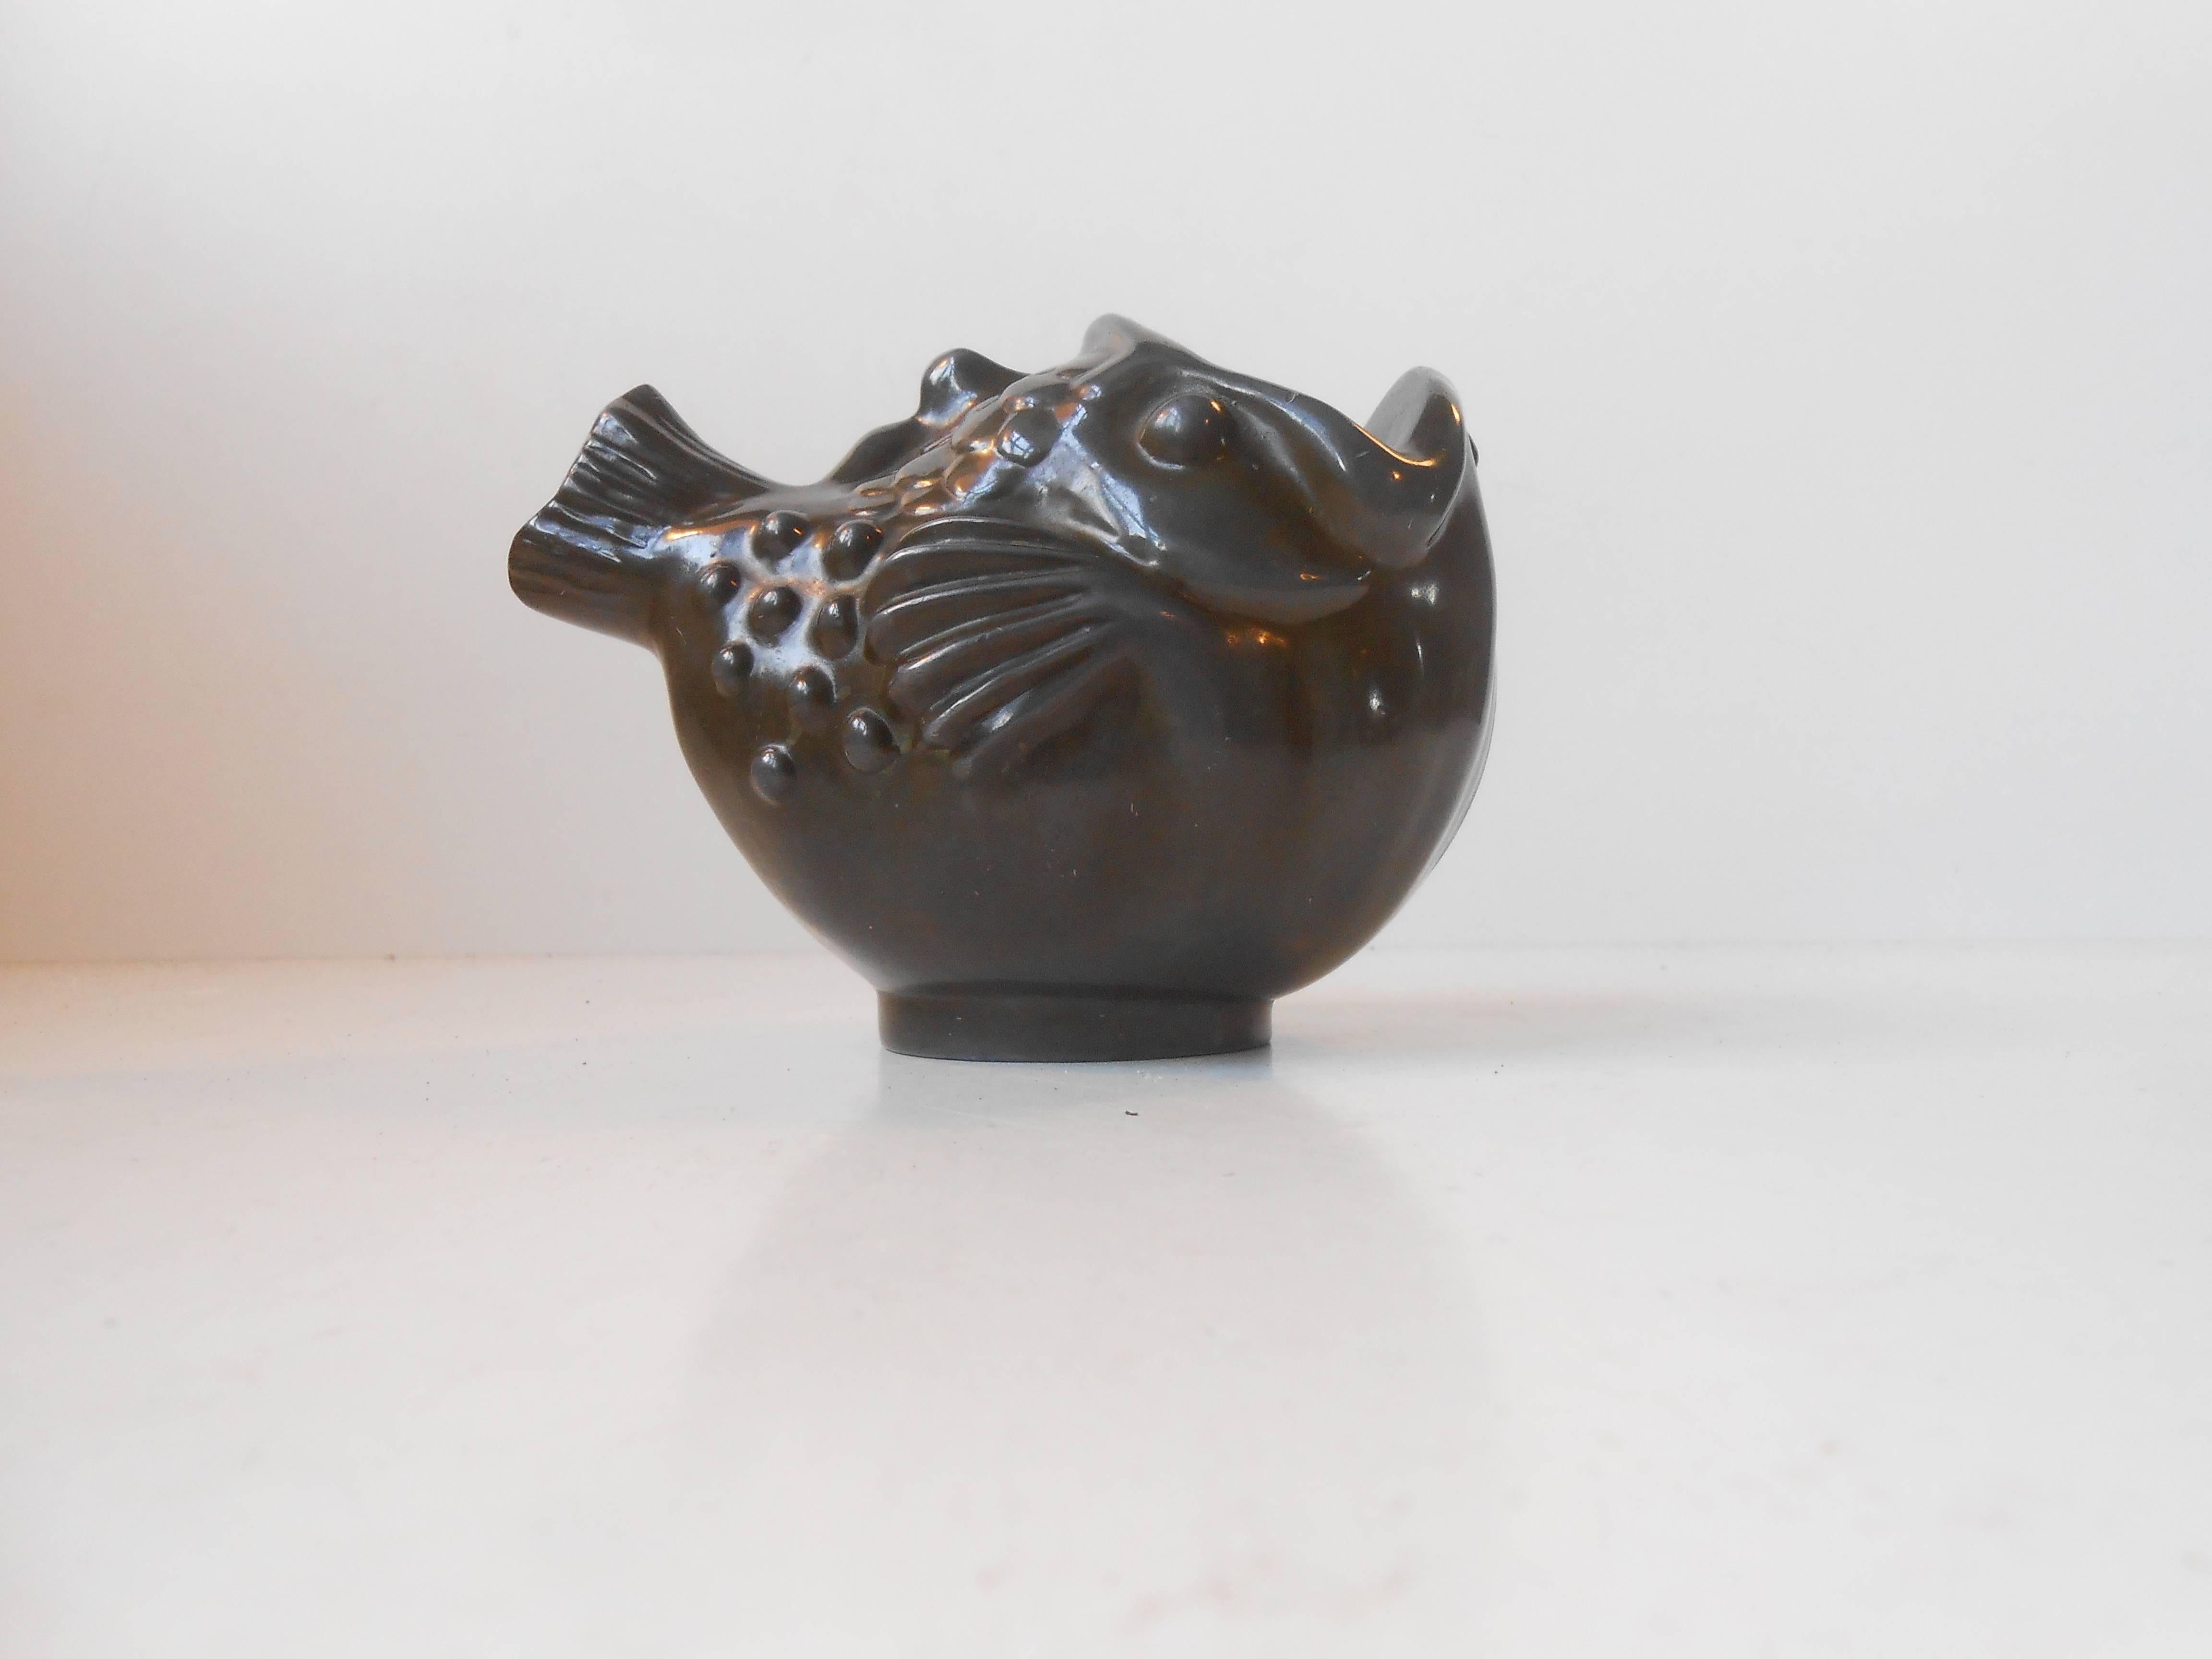 Beautifull little chubby fish-vase by Just Andersen. Made of his own invention, disko metal. Stamped: Just, Denmark, circa 1389. Measurements: Length 5 inches, height 4 inches.